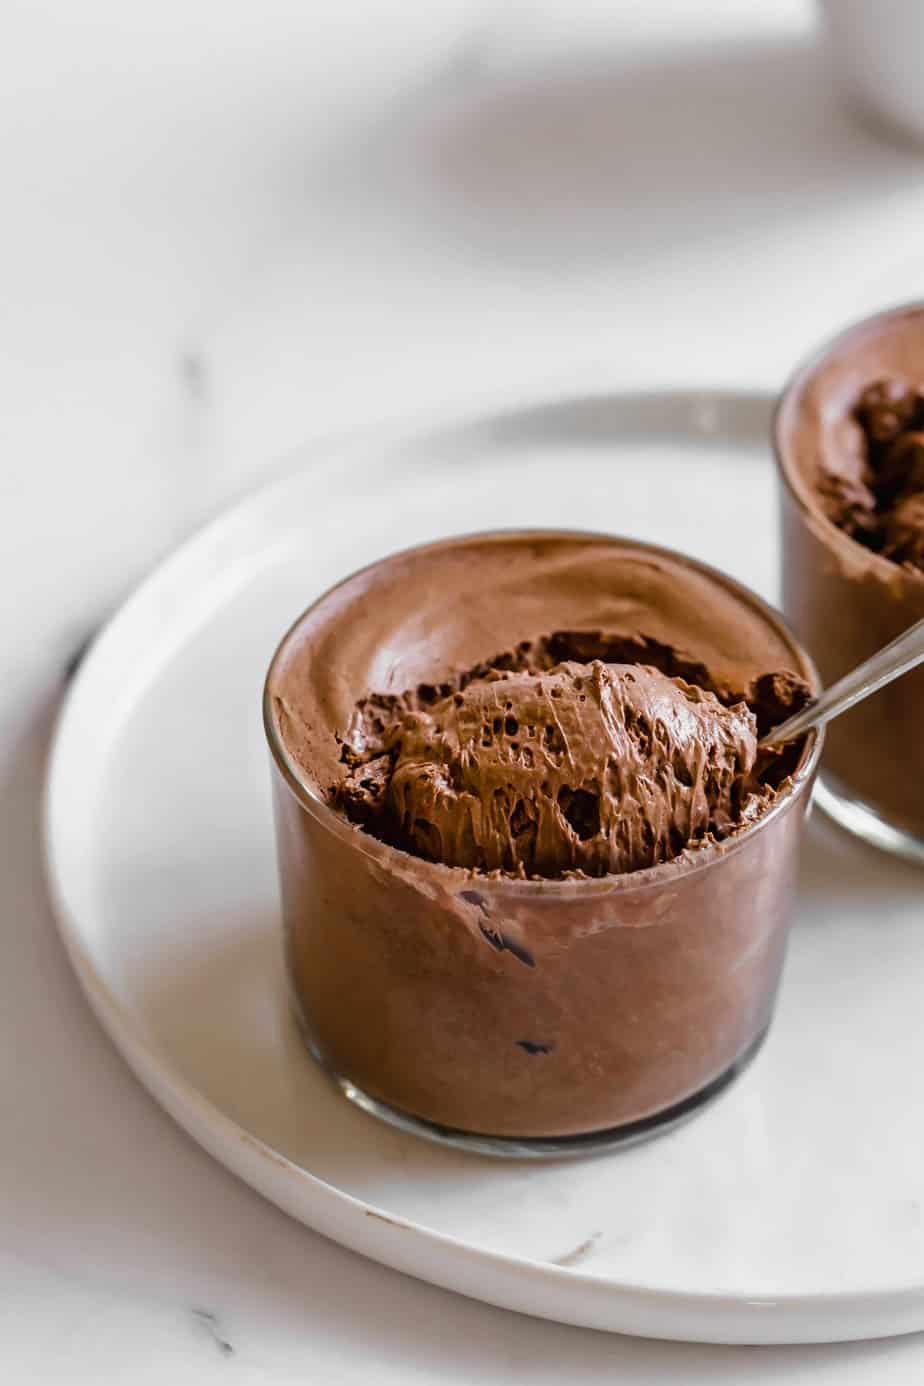 The Creamiest Chocolate Mousse - The only chocolate mousse recipe you will ever need. Perfectly creamy, and easy to make. Perfect for any occasion.